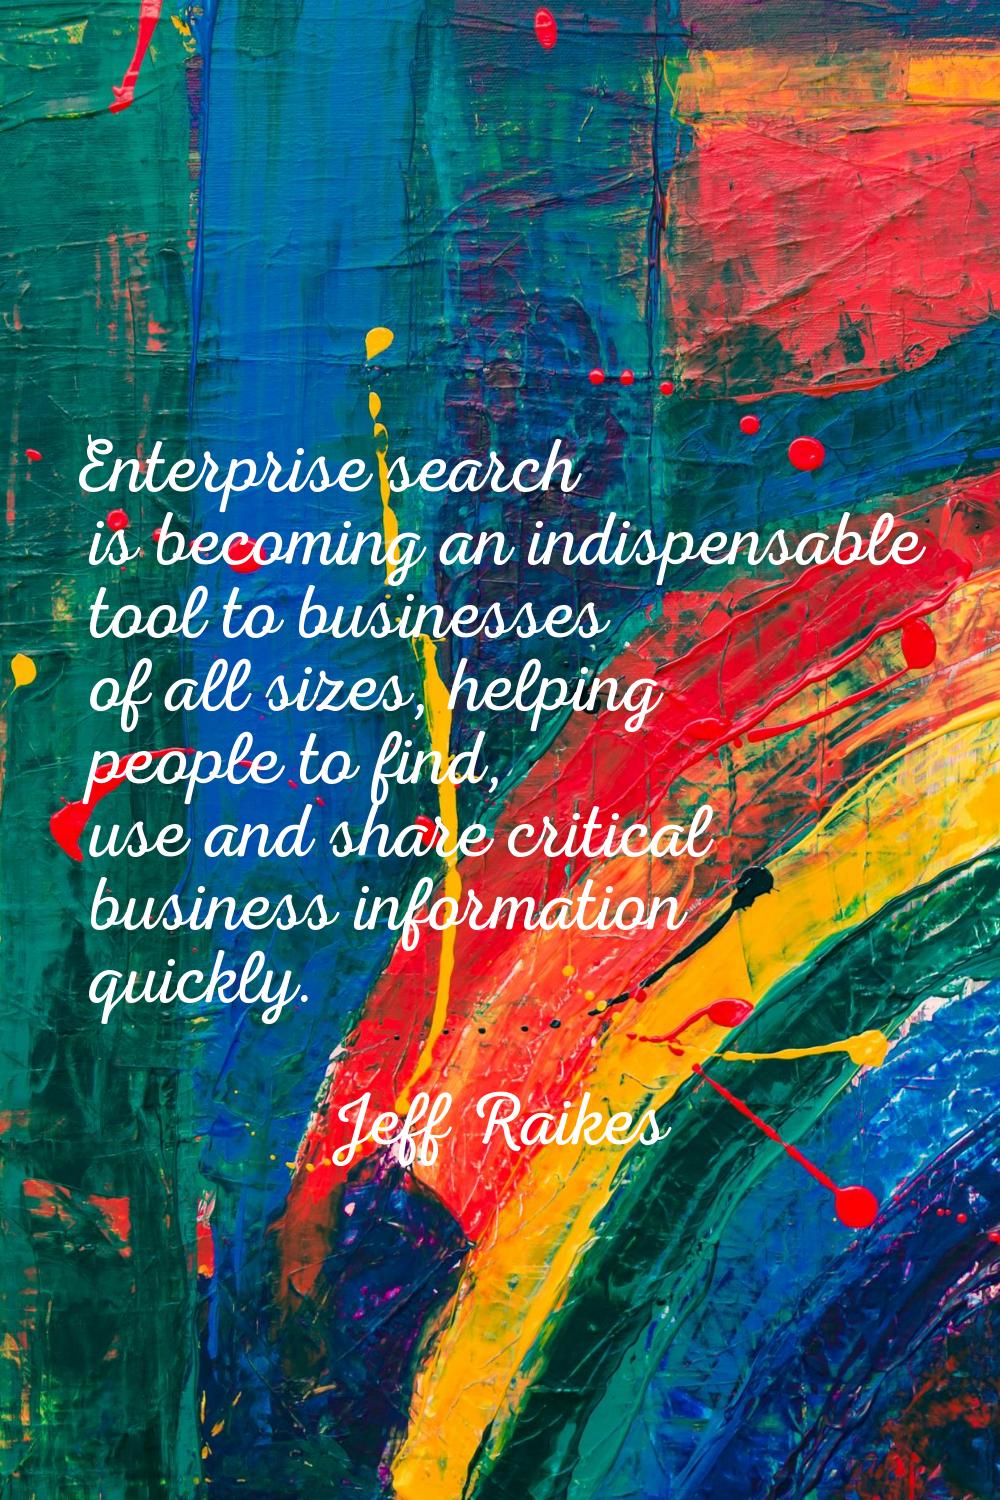 Enterprise search is becoming an indispensable tool to businesses of all sizes, helping people to f